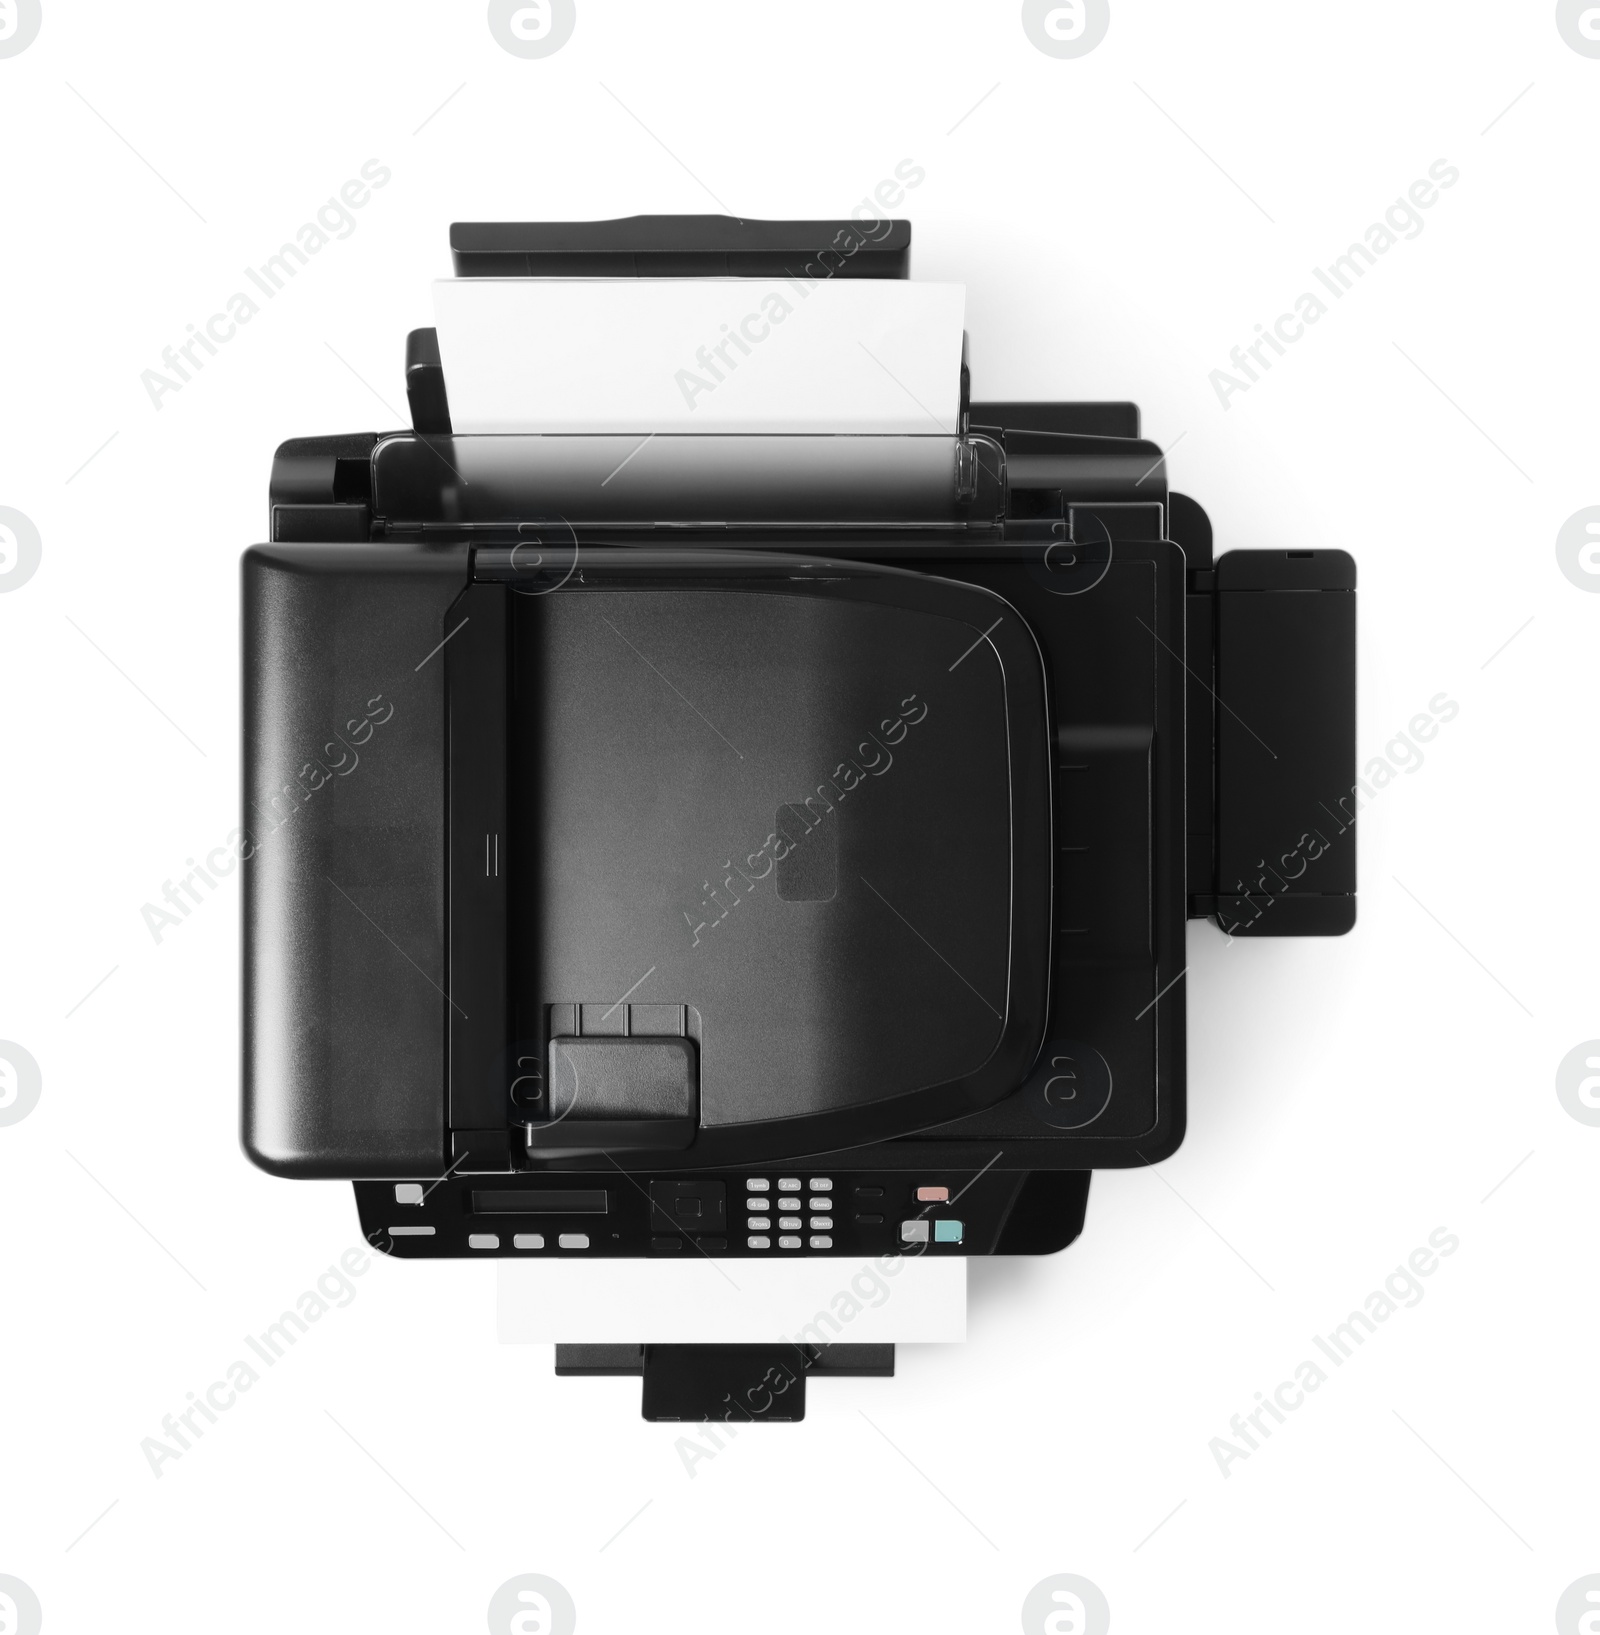 Photo of New modern printer isolated on white, top view